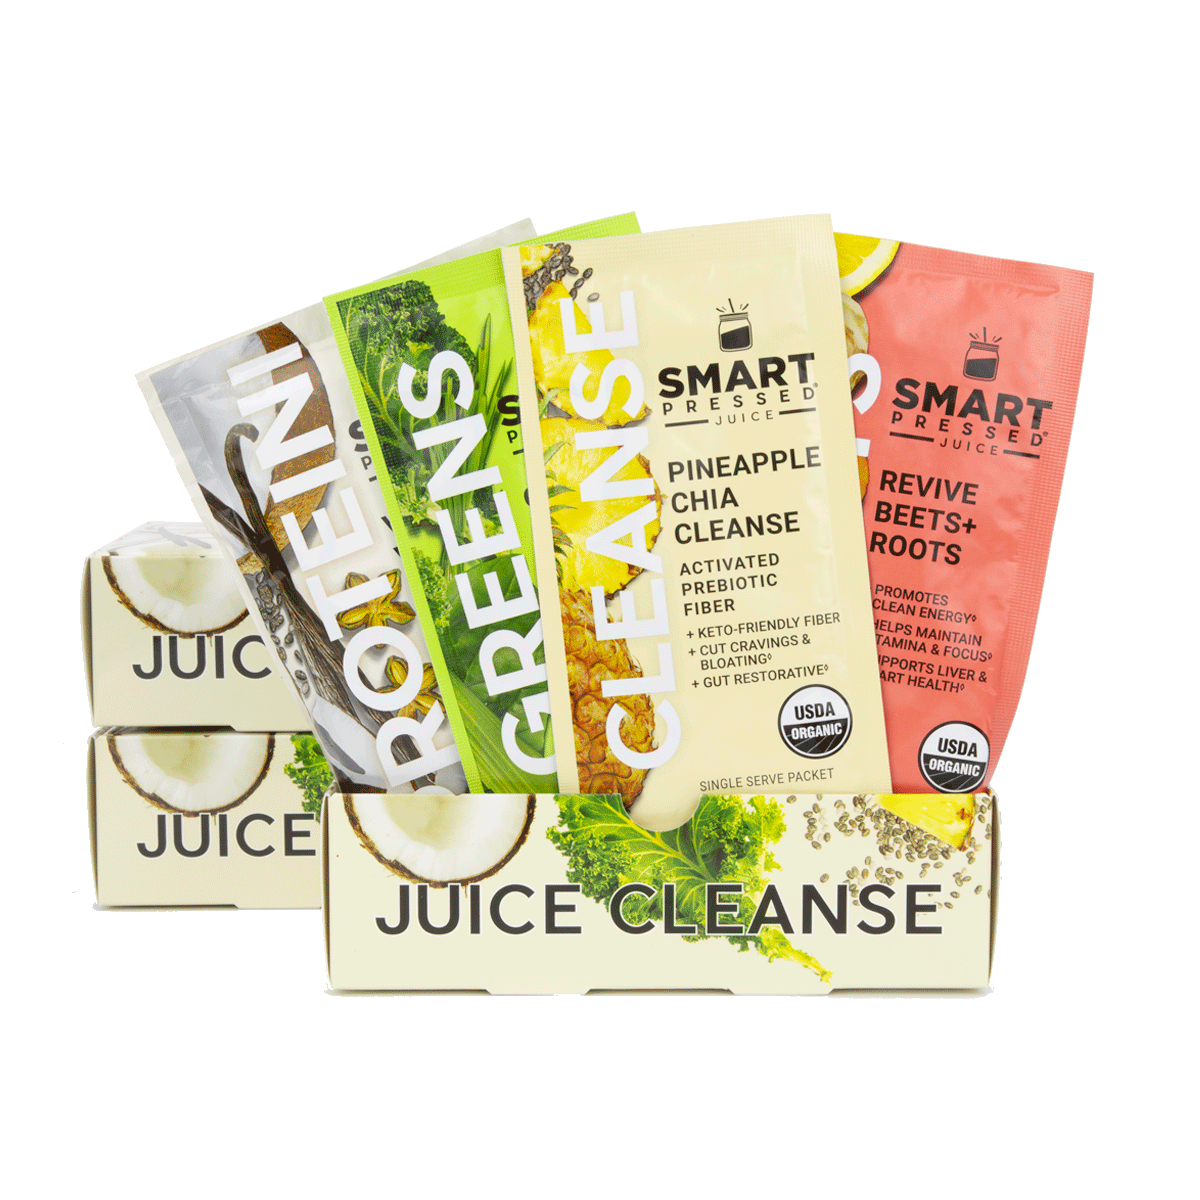 Four single serving sachets of Vegan Vanilla Proteini, Organic Pressed Greens, Pineapple Chia Cleanse, and Revive Beet+Roots side by side in a Juice Cleanse box against a white background.